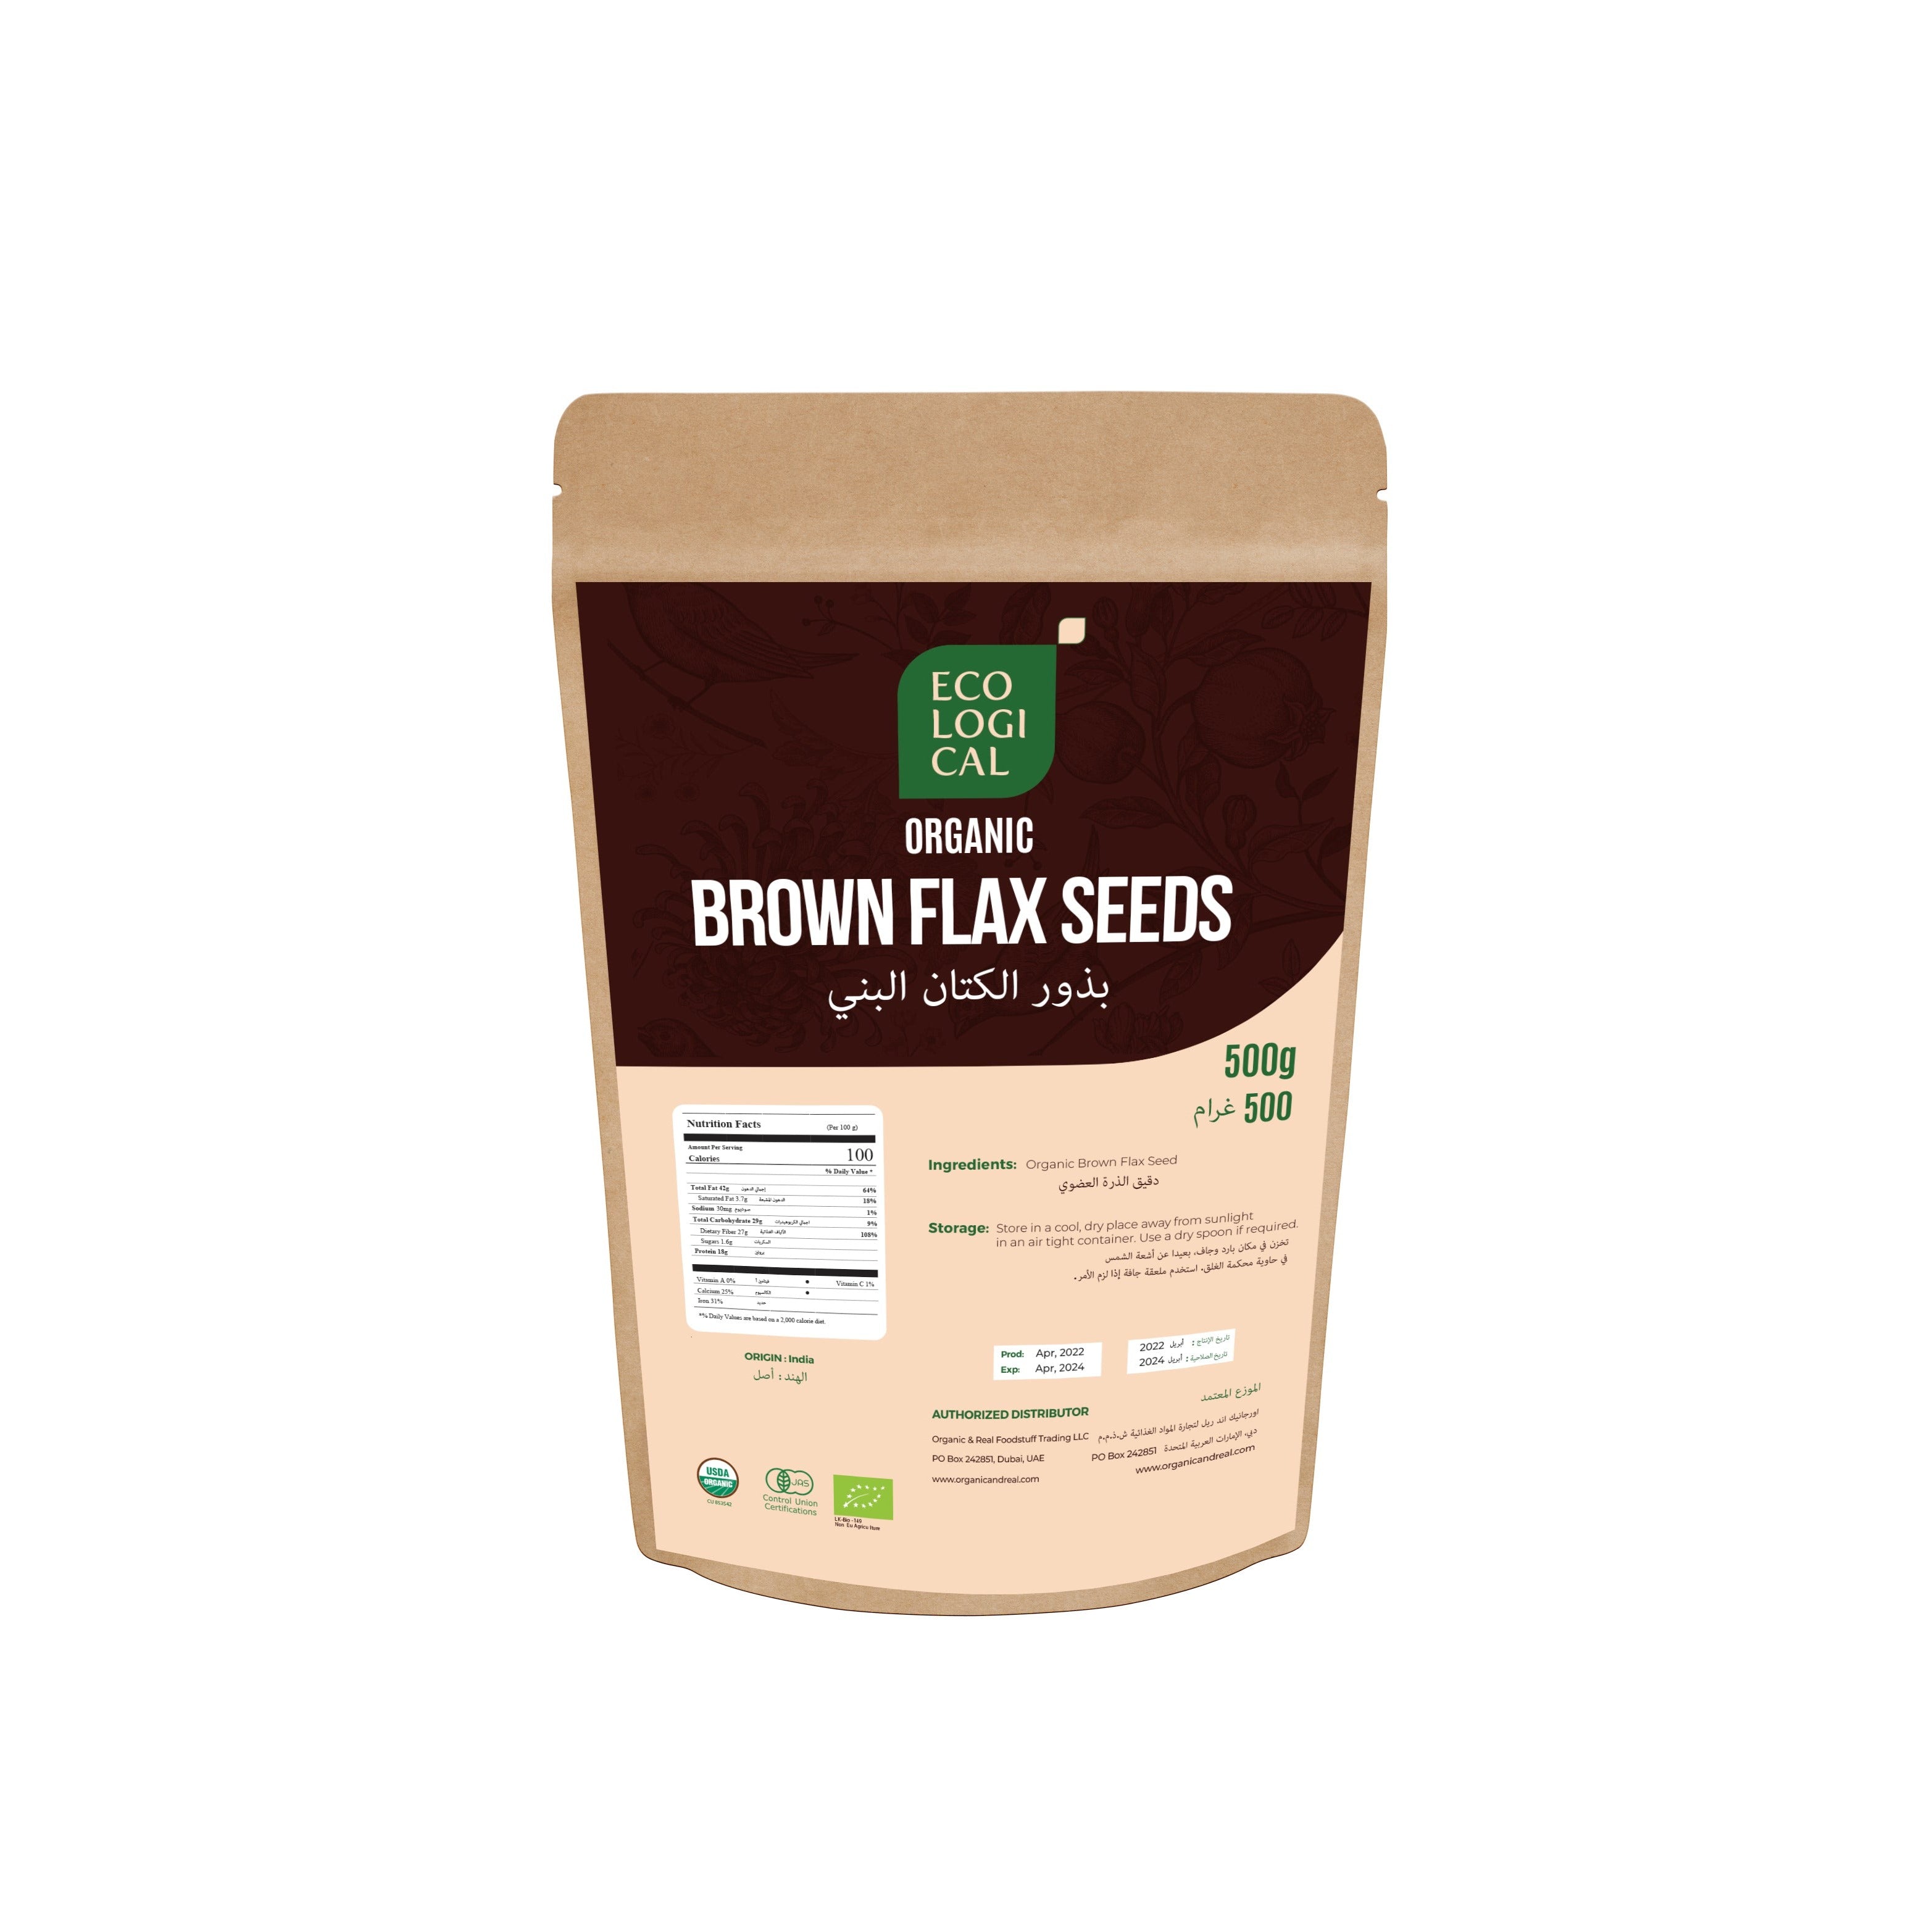 ECOLOGICAL Organic Brown Flax Seeds, 500g